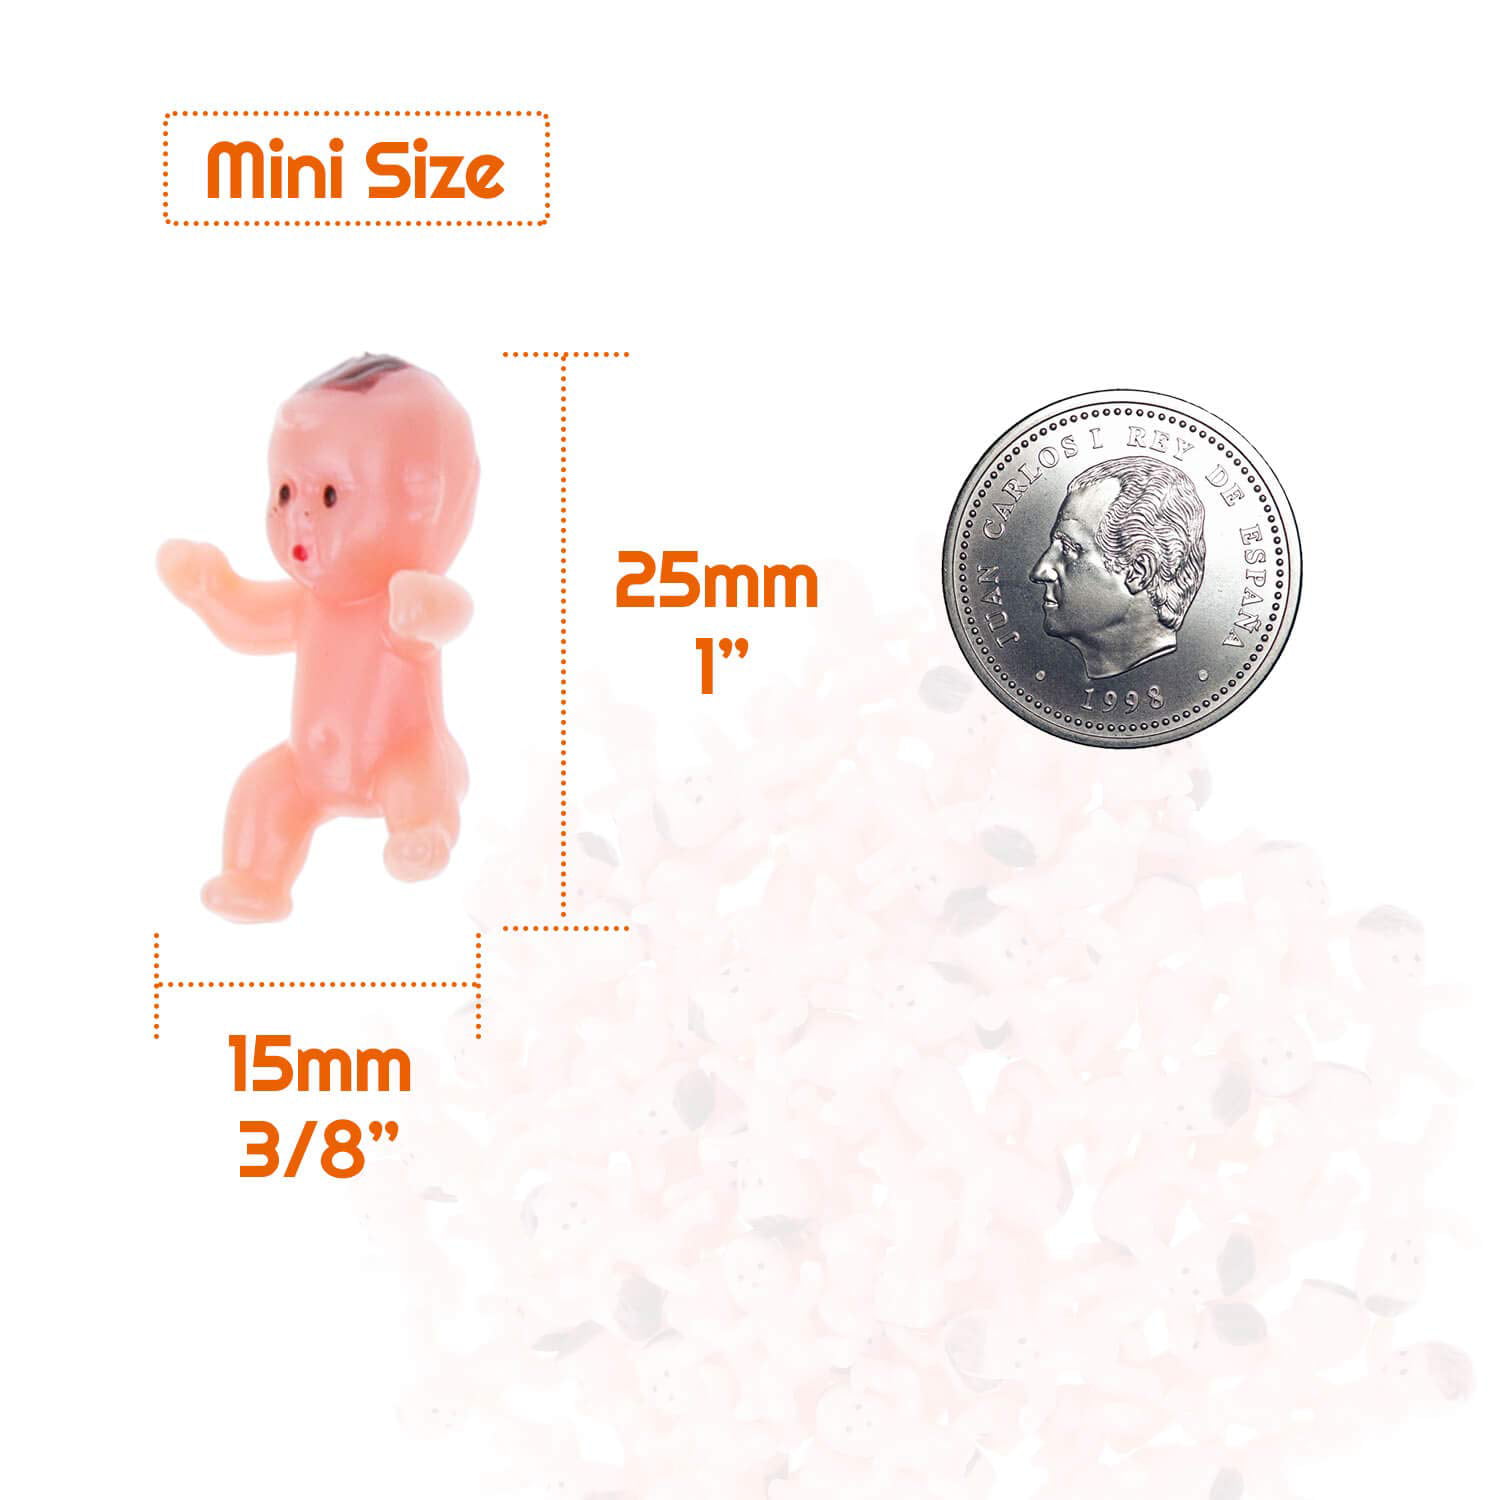 Mini Plastic Babies Selizo 100pcs Tiny Plastic Baby Figurines Small King Cake Babies Bulk for Ice Cube My Water Broke Baby Shower Games 10 Colors 